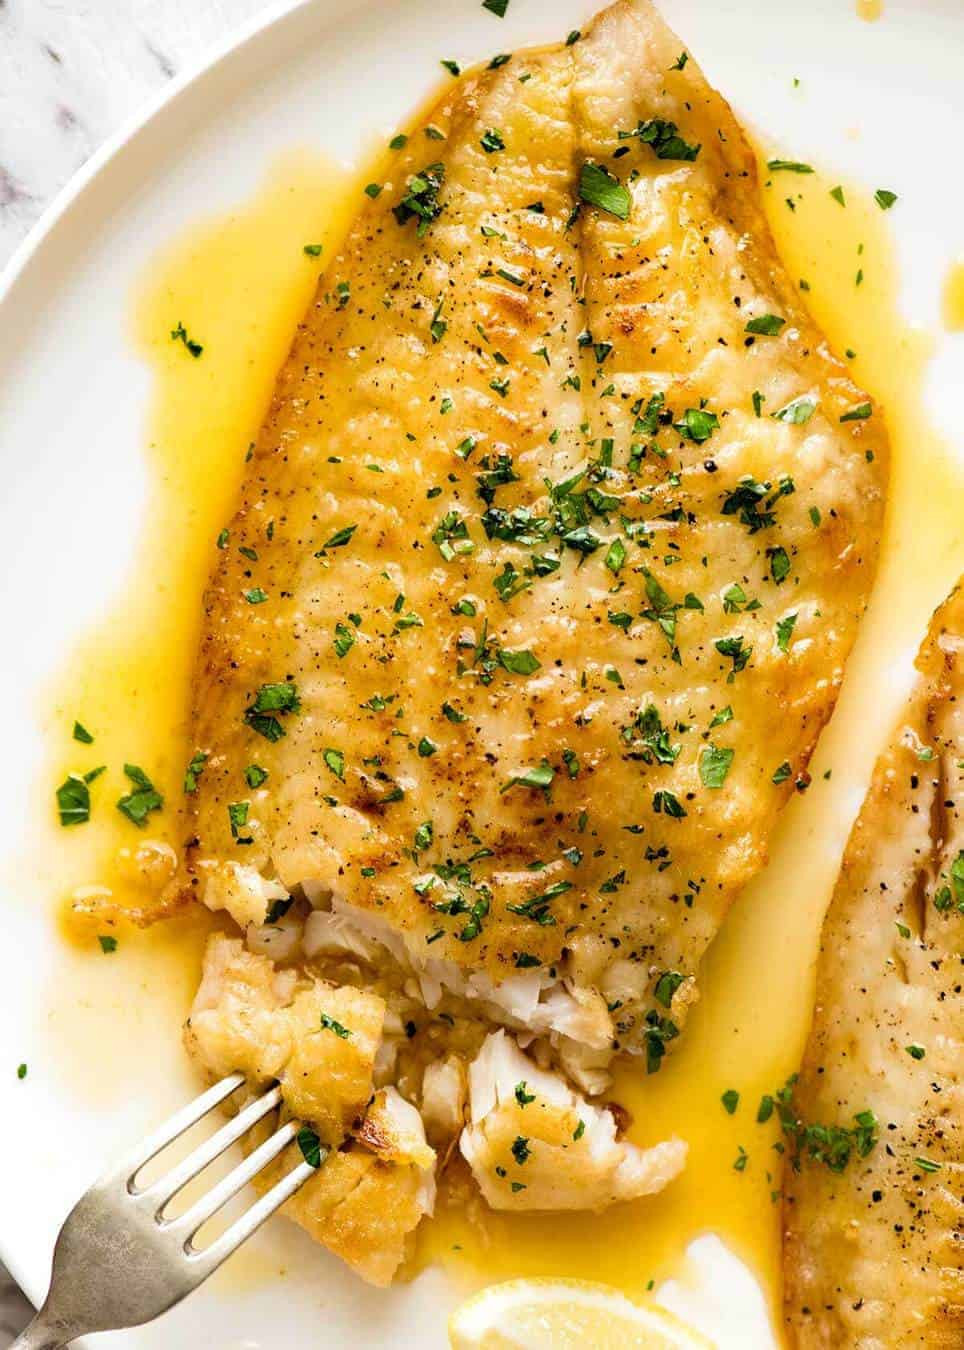 Recipes For Fish Fillet
 Easy Pan Fried Fish Fillet Recipes